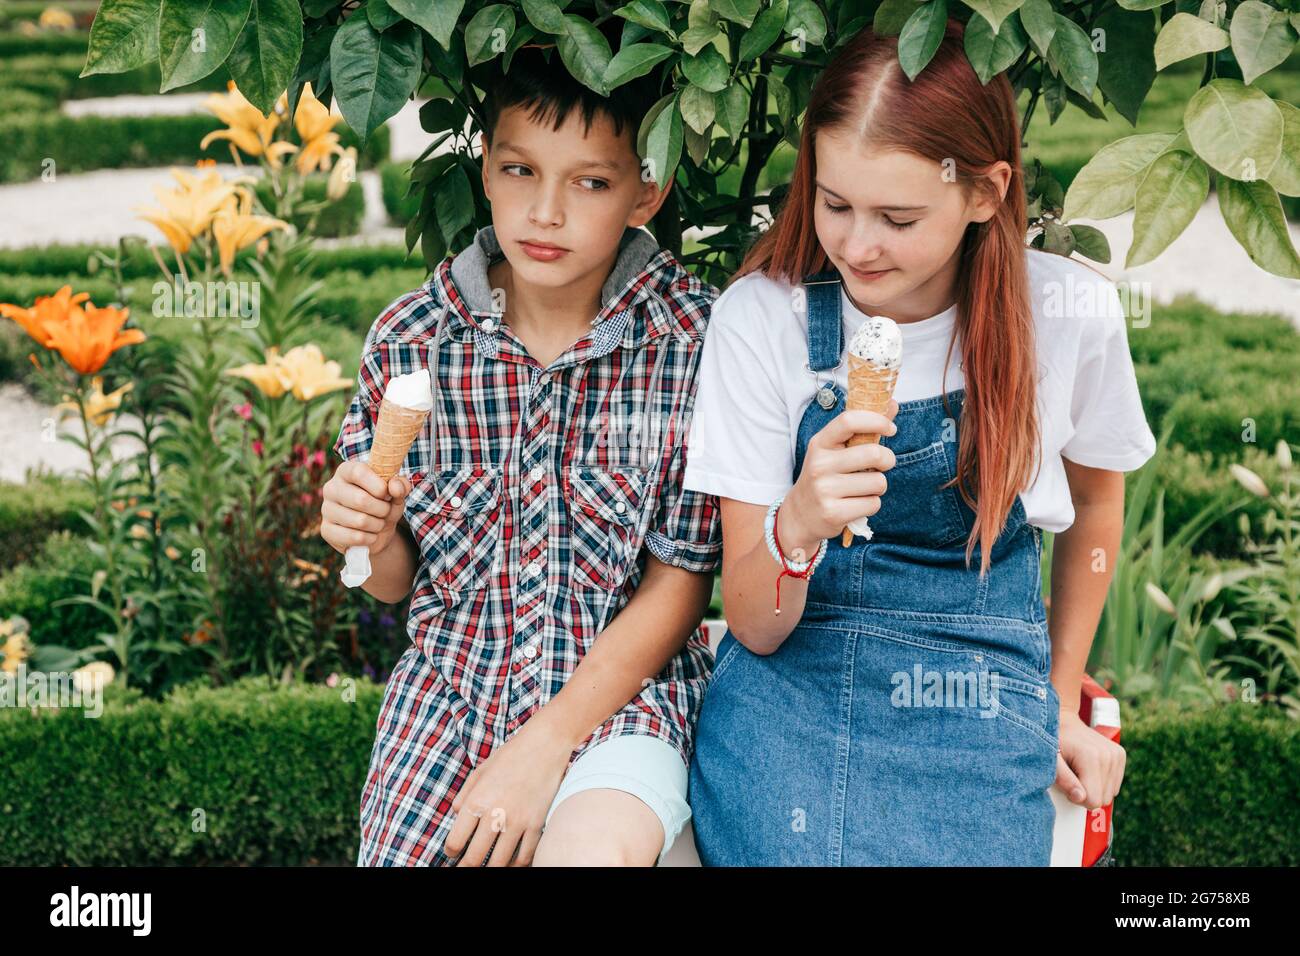 children teenagers boy, girl are having fun on summer day against background of greenery, eating ice cream together Stock Photo